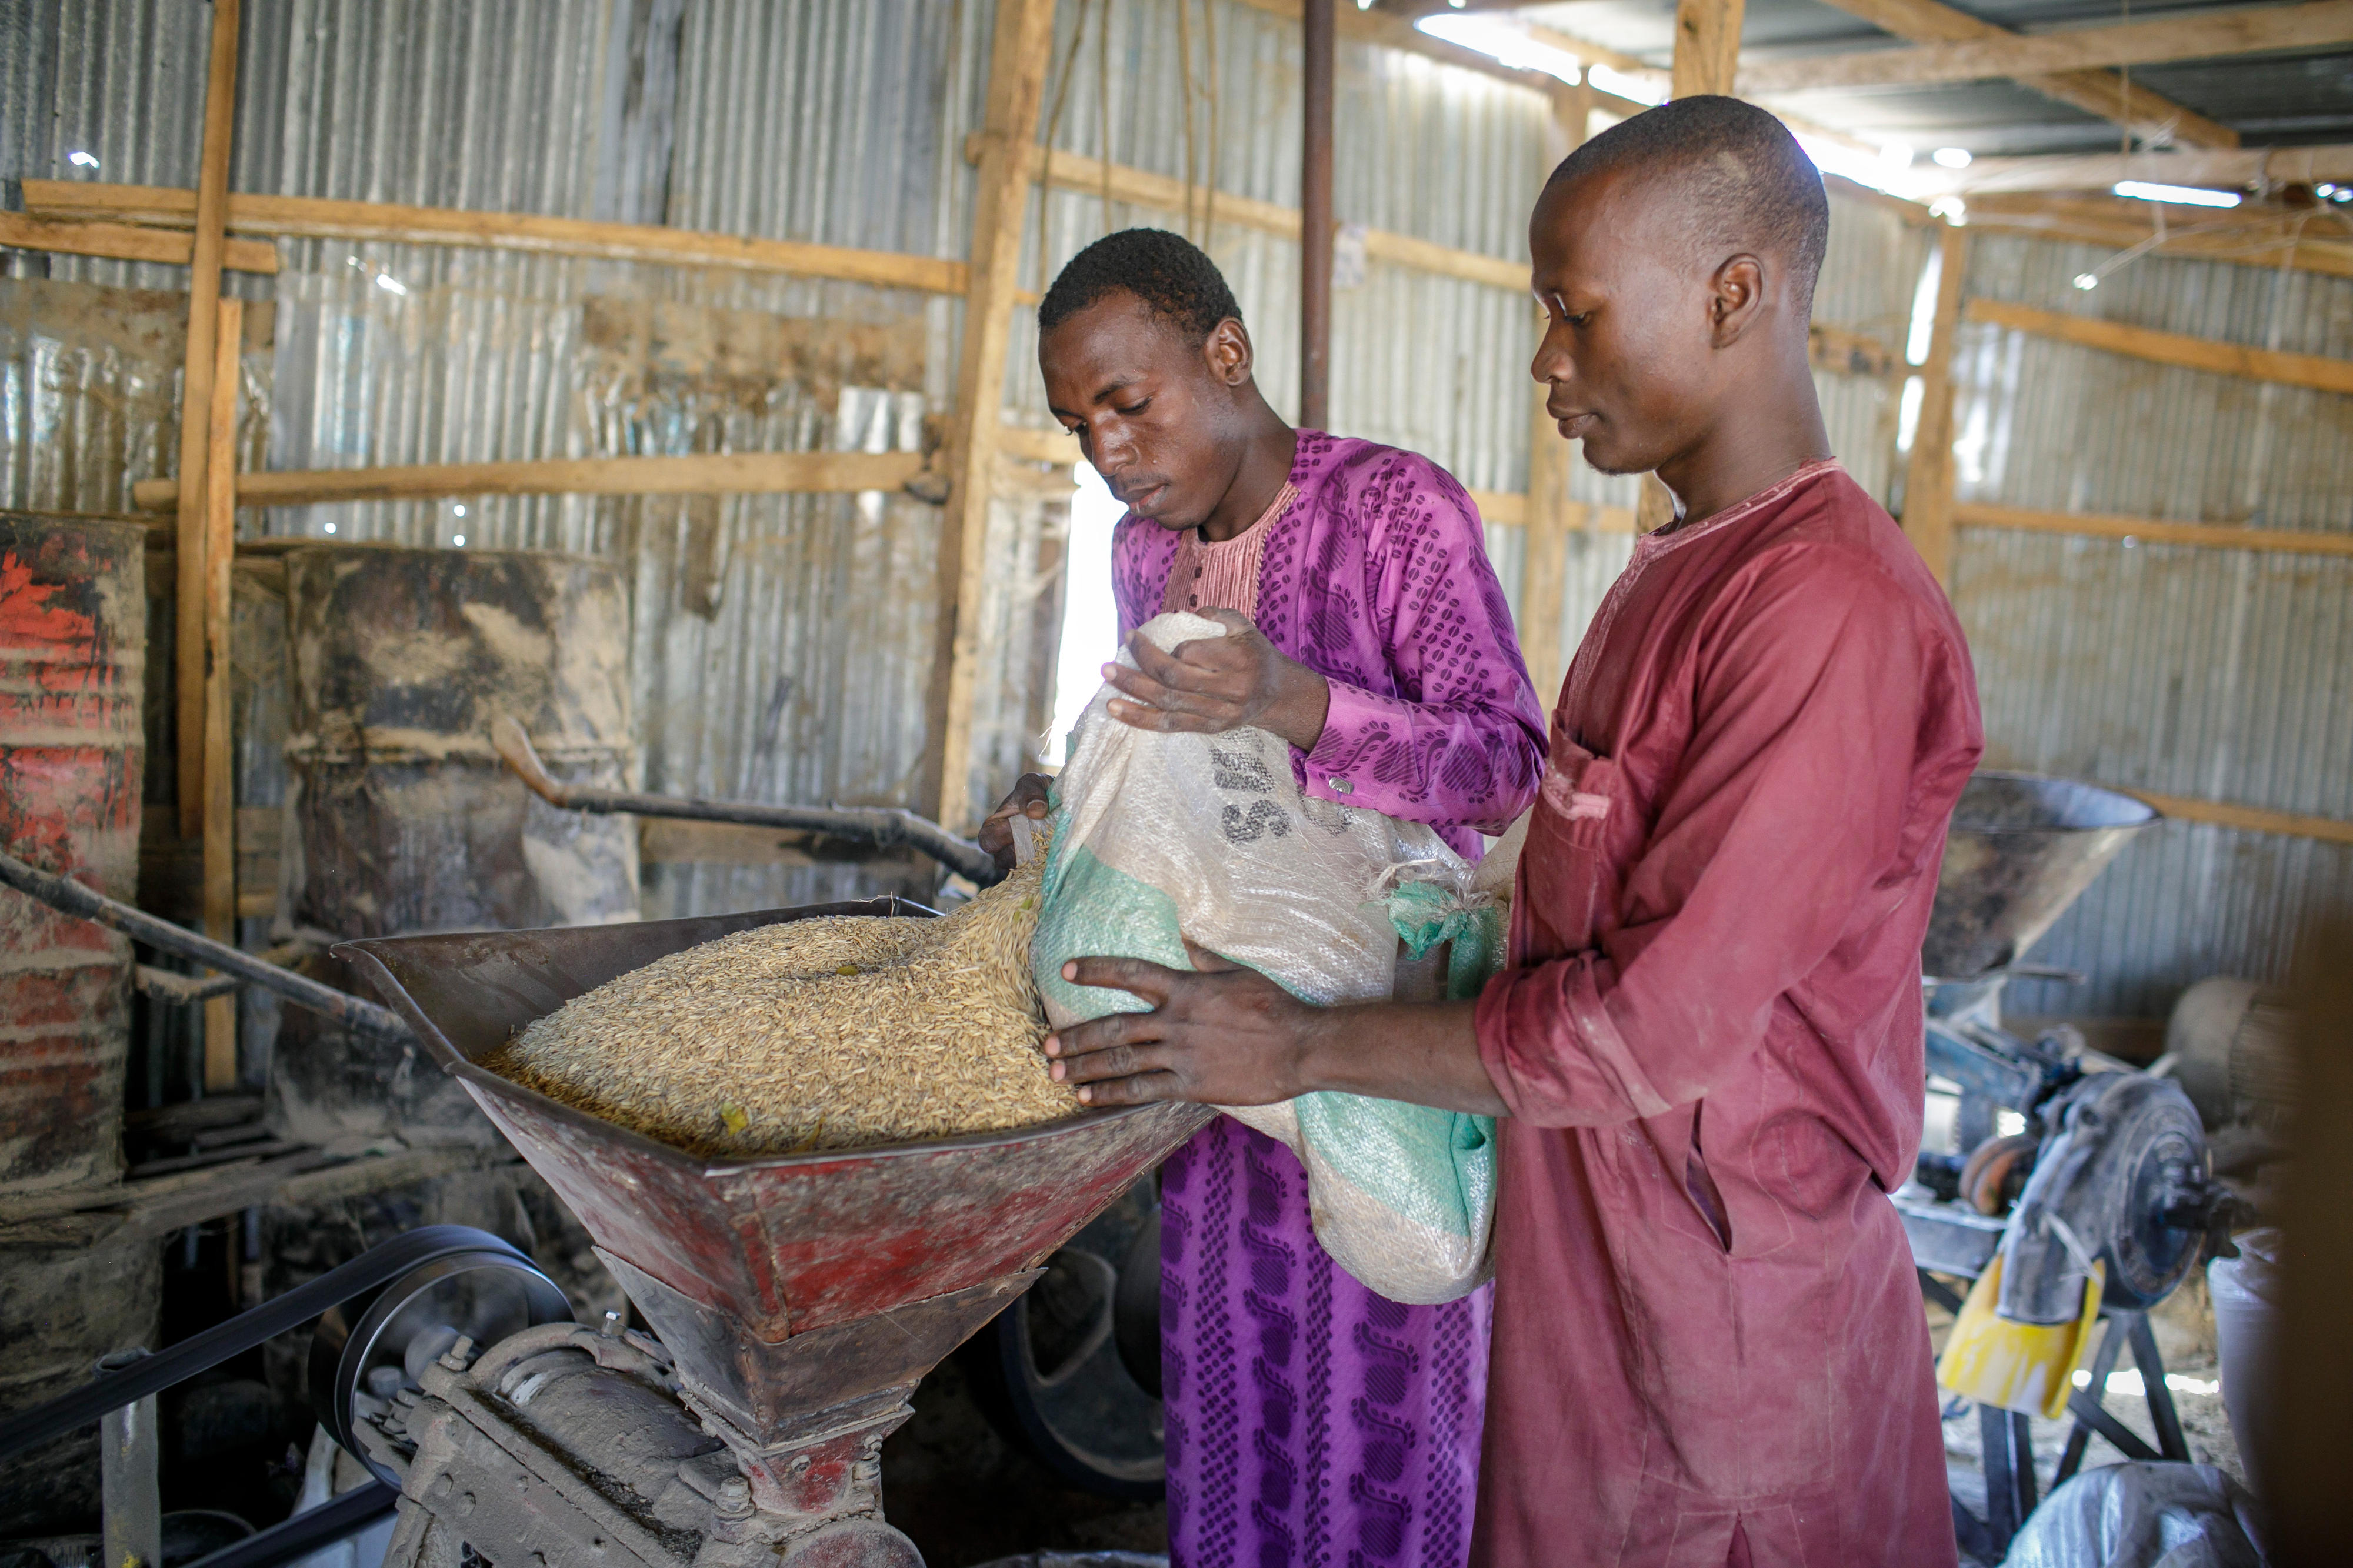 Workers at a small rice mill in Jega, Nigeria